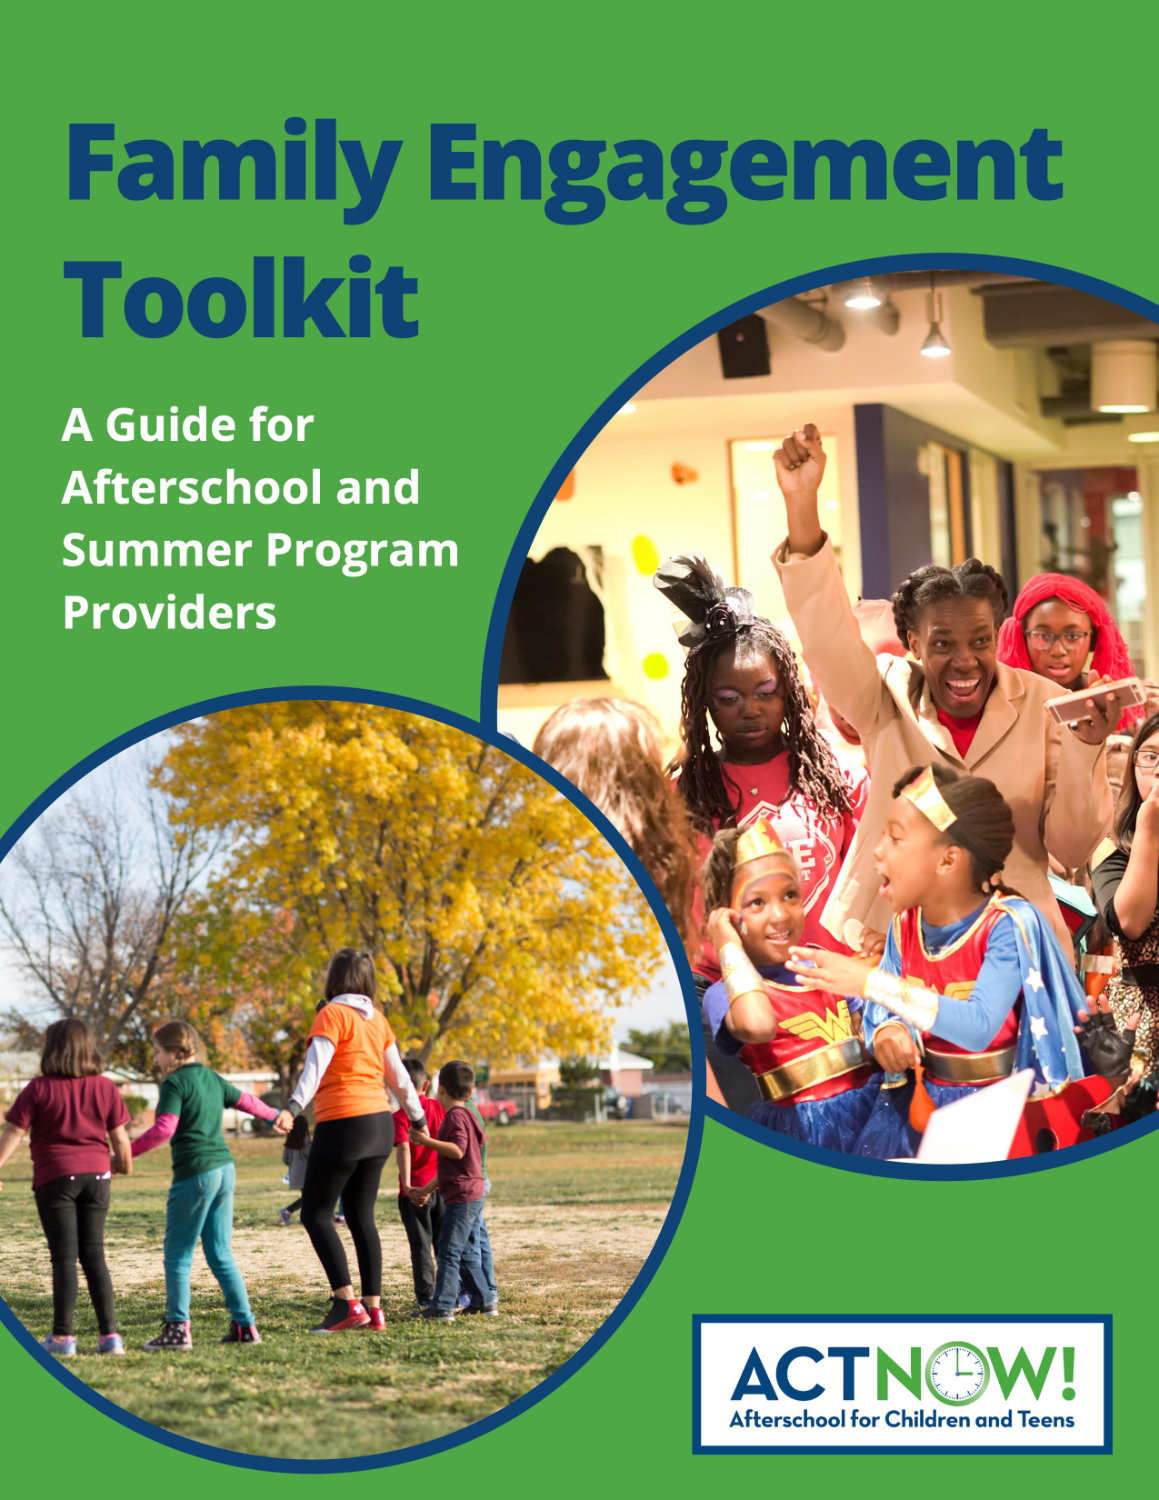 Family Engagement guide thumbnail